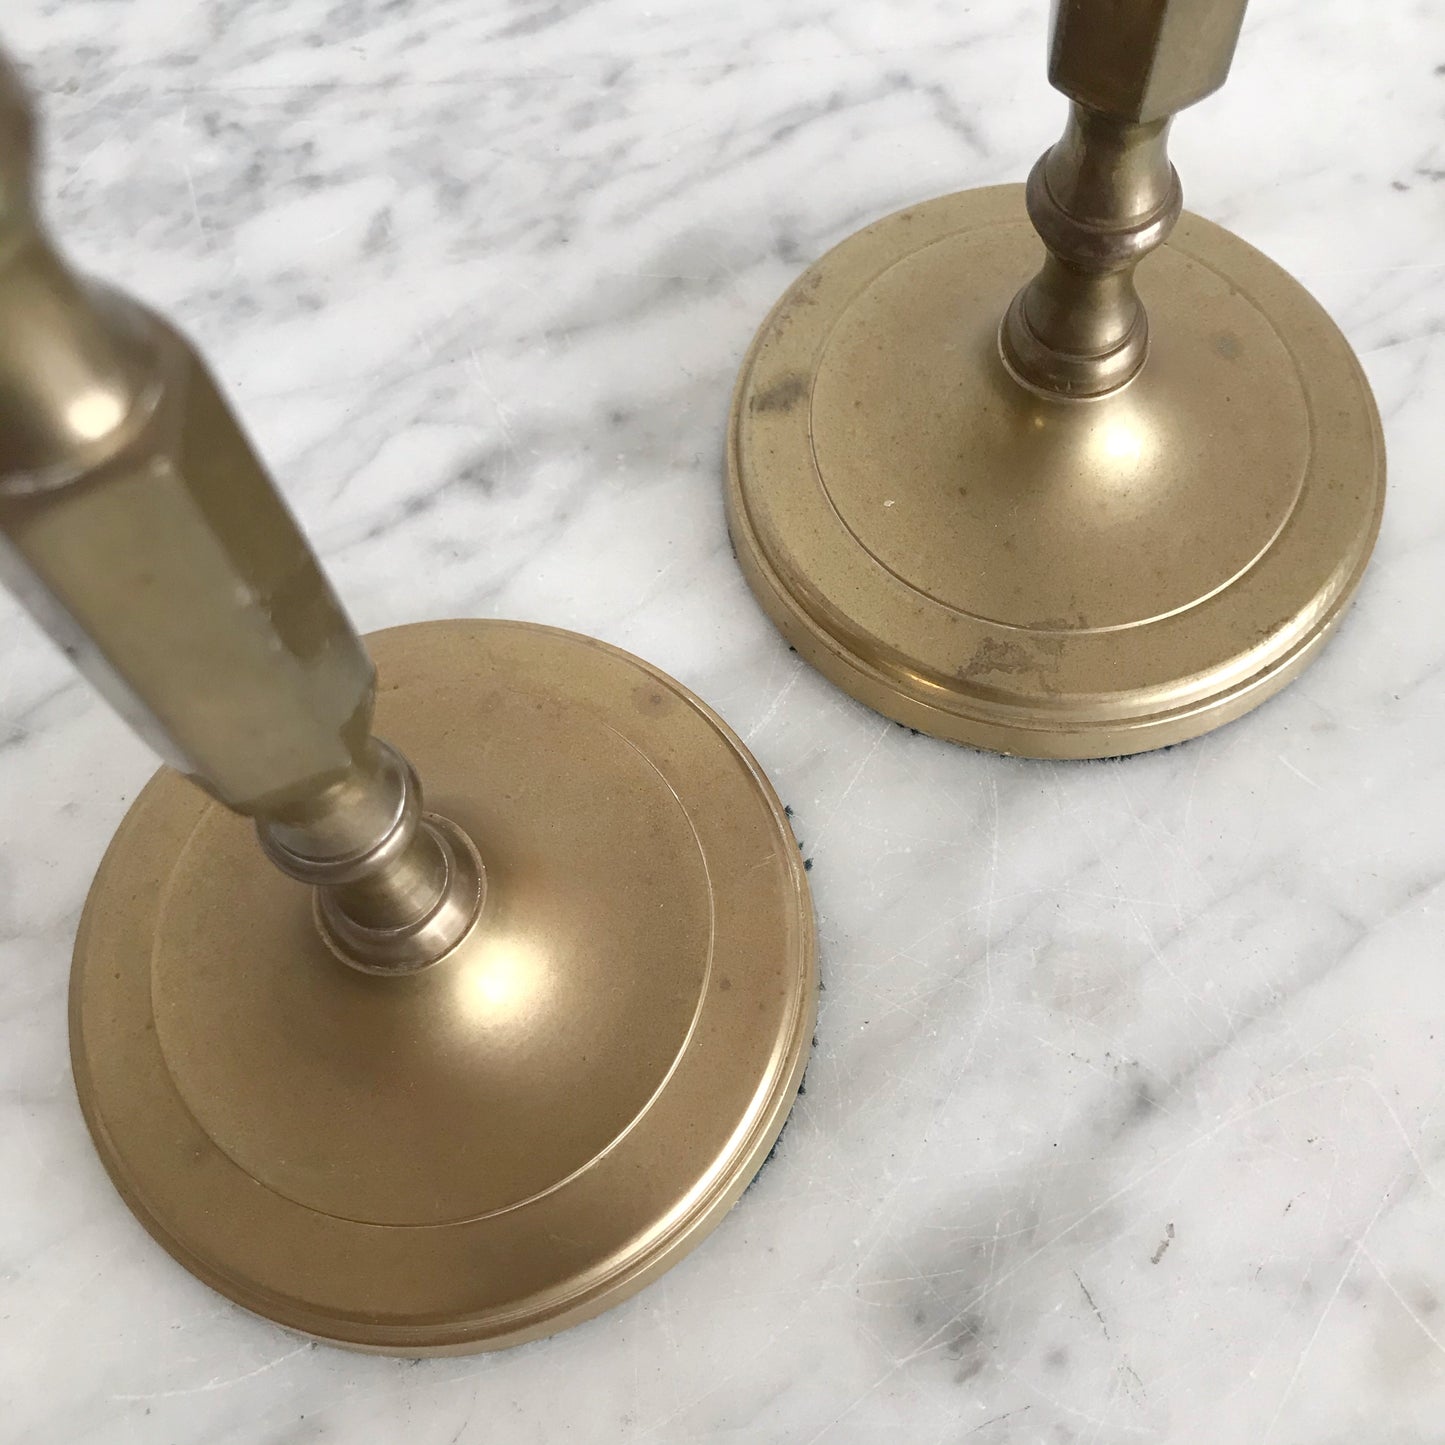 Pair of Vintage Brass Hex Candle Holders